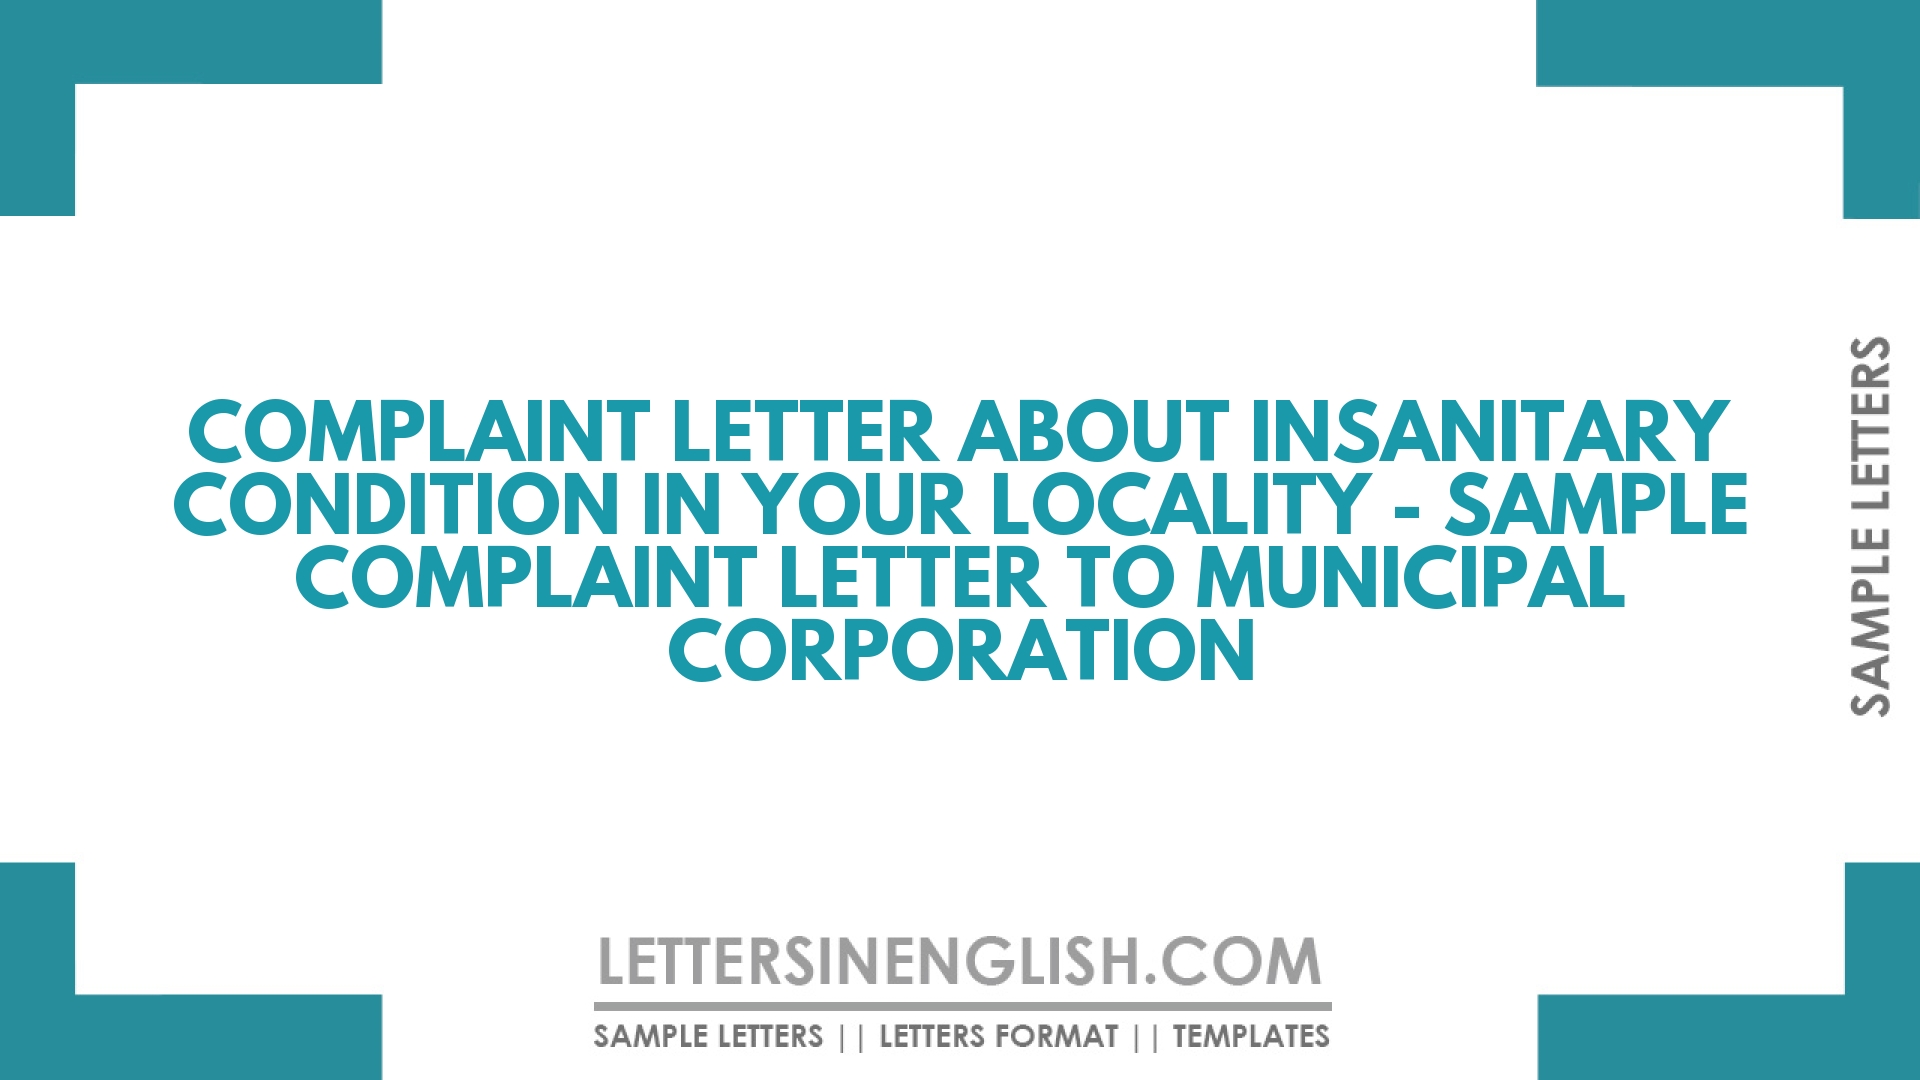 Complaint Letter about Insanitary Condition in your Locality – Sample Complaint Letter to Municipal Corporation